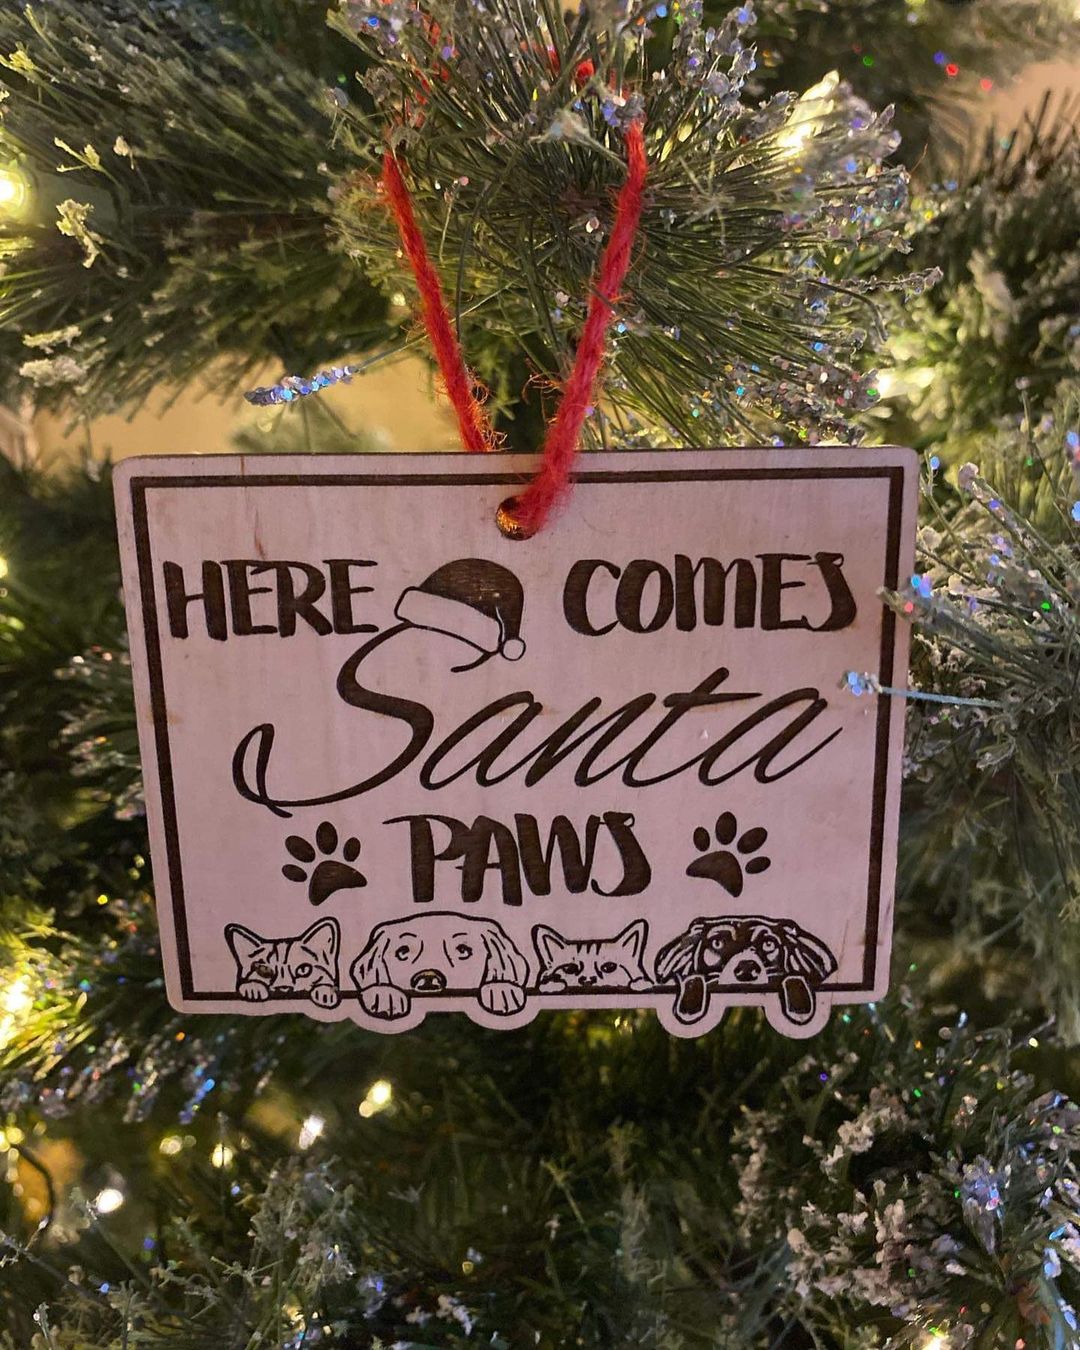 ❄️Get your custom ornament! ❄️

We are excited to offer 4 different pet themed ornaments, with a portion of each purchase being donated to our shelter! 

Each ornament is only $15 and will be custom made before Christmas if ordered by December 9th! Once your ornament is ready, our team will contact you to arrange pick up! 

To place your order please visit our link in bio! 

🐾 Happy Holidays from NHS! 🐾

<a target='_blank' href='https://www.instagram.com/explore/tags/tree/'>#tree</a> <a target='_blank' href='https://www.instagram.com/explore/tags/christmas/'>#christmas</a> <a target='_blank' href='https://www.instagram.com/explore/tags/fundraiser/'>#fundraiser</a> <a target='_blank' href='https://www.instagram.com/explore/tags/paws/'>#paws</a> <a target='_blank' href='https://www.instagram.com/explore/tags/catsofinstagram/'>#catsofinstagram</a> <a target='_blank' href='https://www.instagram.com/explore/tags/dogsofinstagram/'>#dogsofinstagram</a> <a target='_blank' href='https://www.instagram.com/explore/tags/rainbowbridge/'>#rainbowbridge</a> <a target='_blank' href='https://www.instagram.com/explore/tags/animalshelter/'>#animalshelter</a> <a target='_blank' href='https://www.instagram.com/explore/tags/humanesociety/'>#humanesociety</a> <a target='_blank' href='https://www.instagram.com/explore/tags/nonprofit/'>#nonprofit</a> <a target='_blank' href='https://www.instagram.com/explore/tags/charity/'>#charity</a> <a target='_blank' href='https://www.instagram.com/explore/tags/happyholidays/'>#happyholidays</a> <a target='_blank' href='https://www.instagram.com/explore/tags/northumberlandcountyontario/'>#northumberlandcountyontario</a>